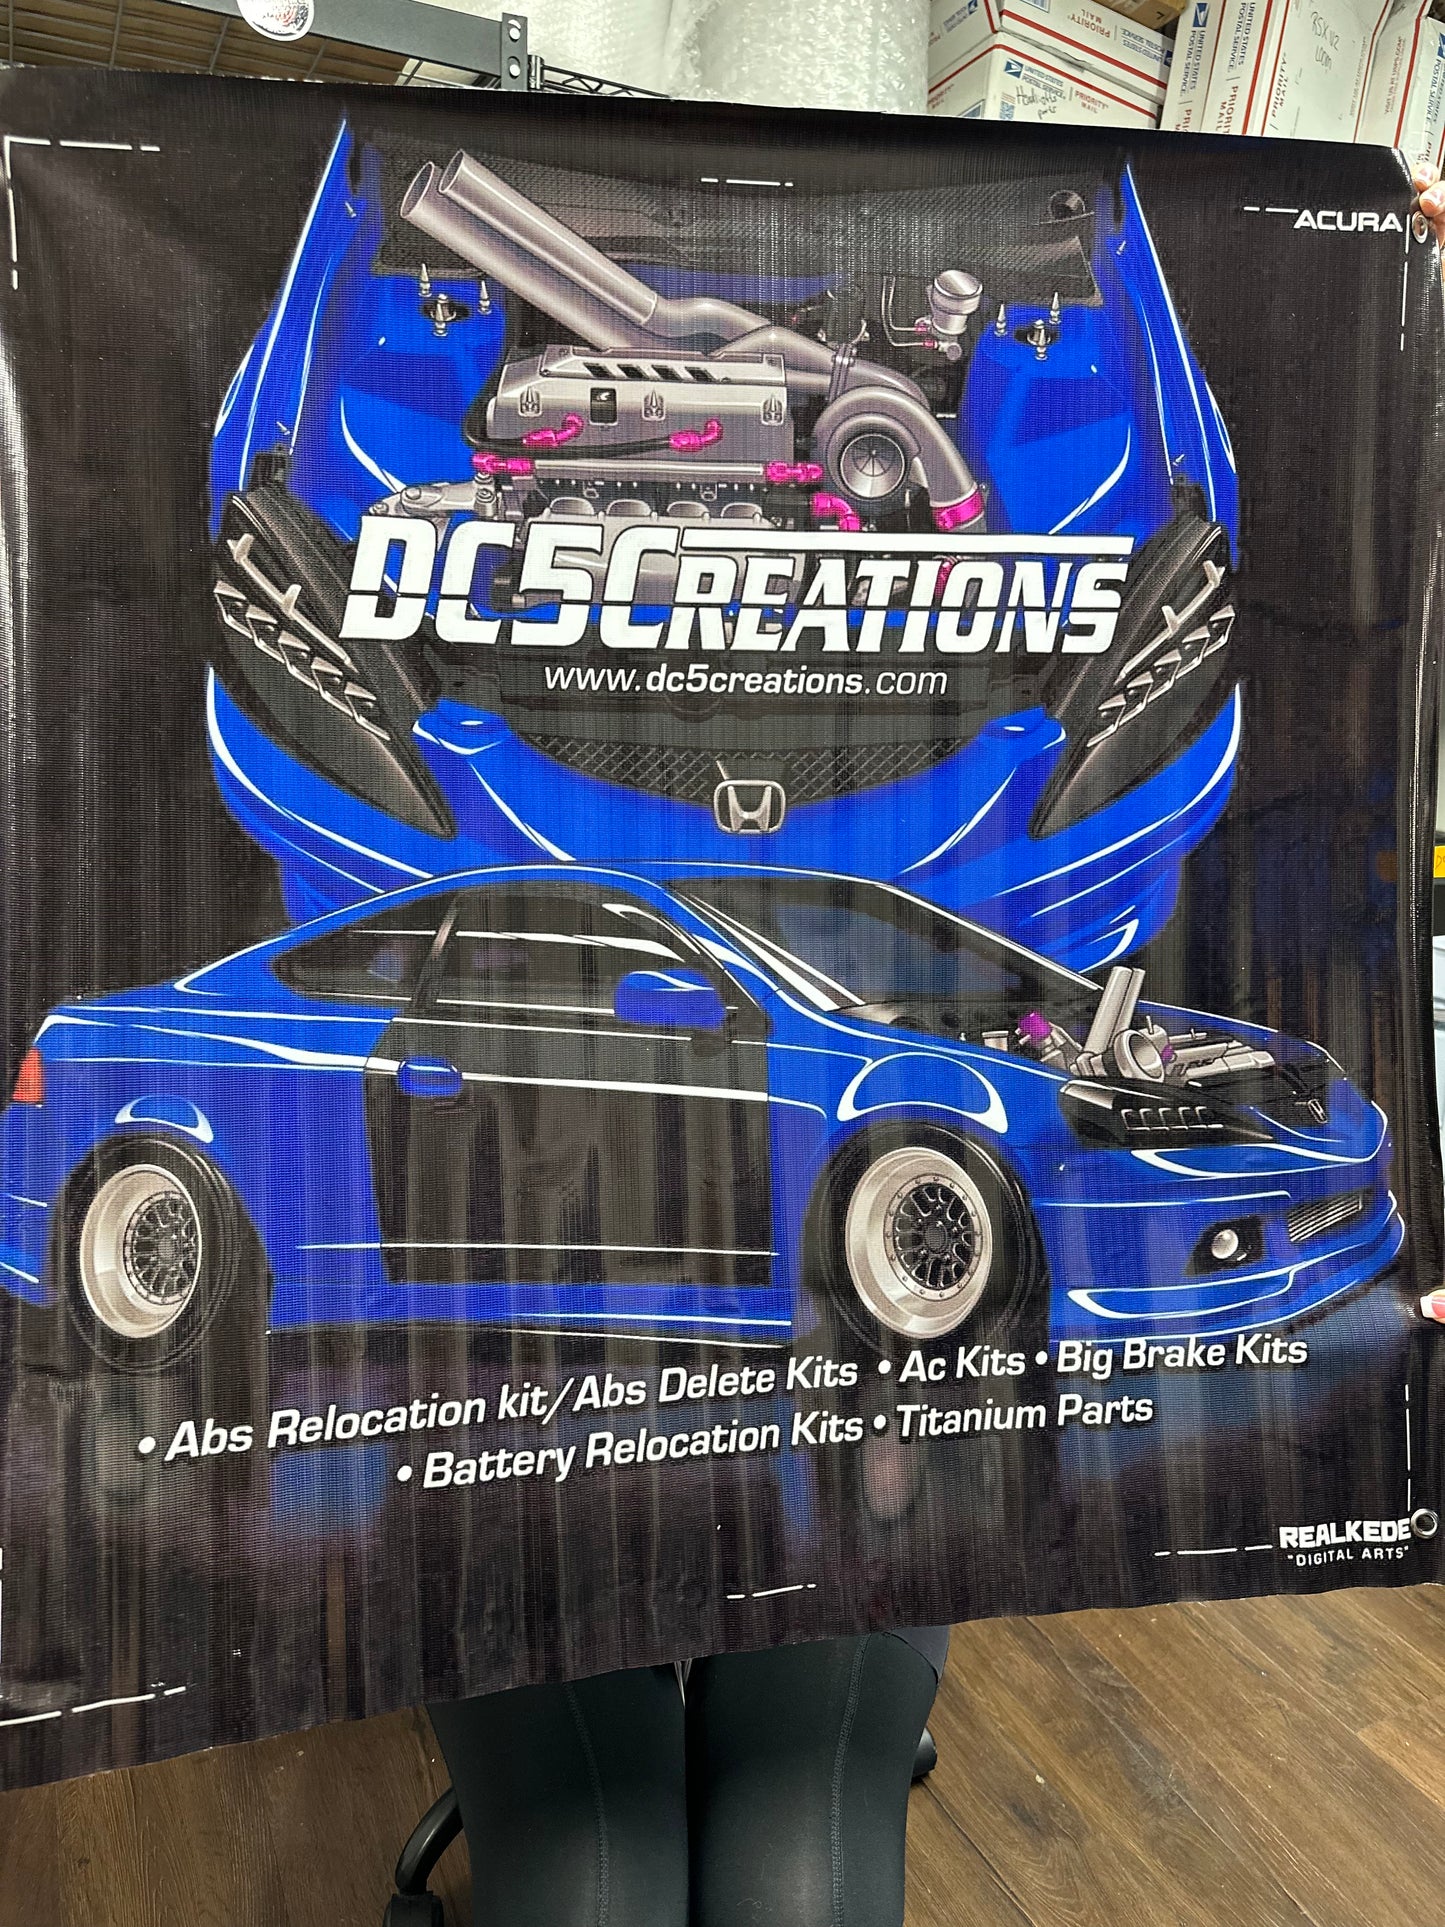 Dc5creations banner